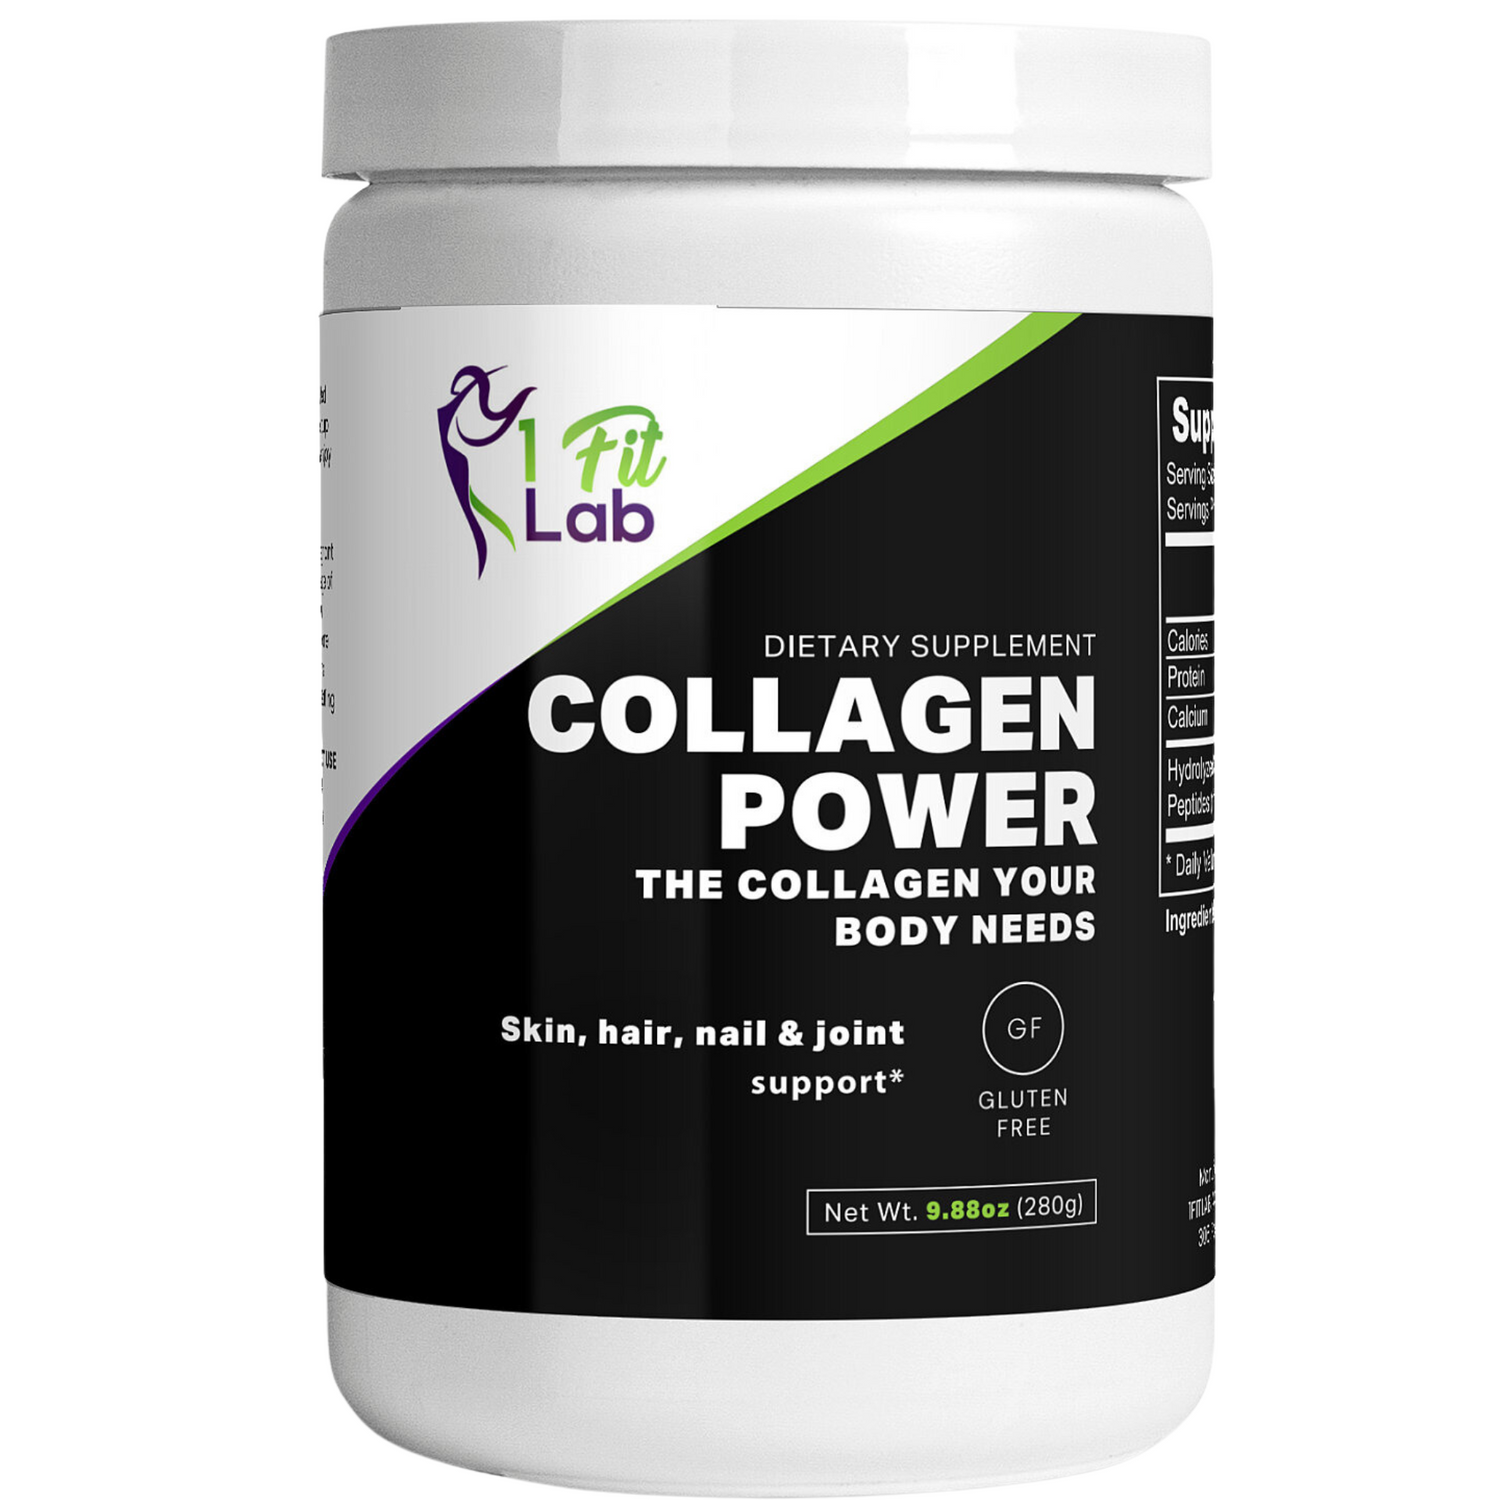 Bottle of Collagen Power Peptides - Grass-Fed, Pure & Unflavored for beauty and joint health